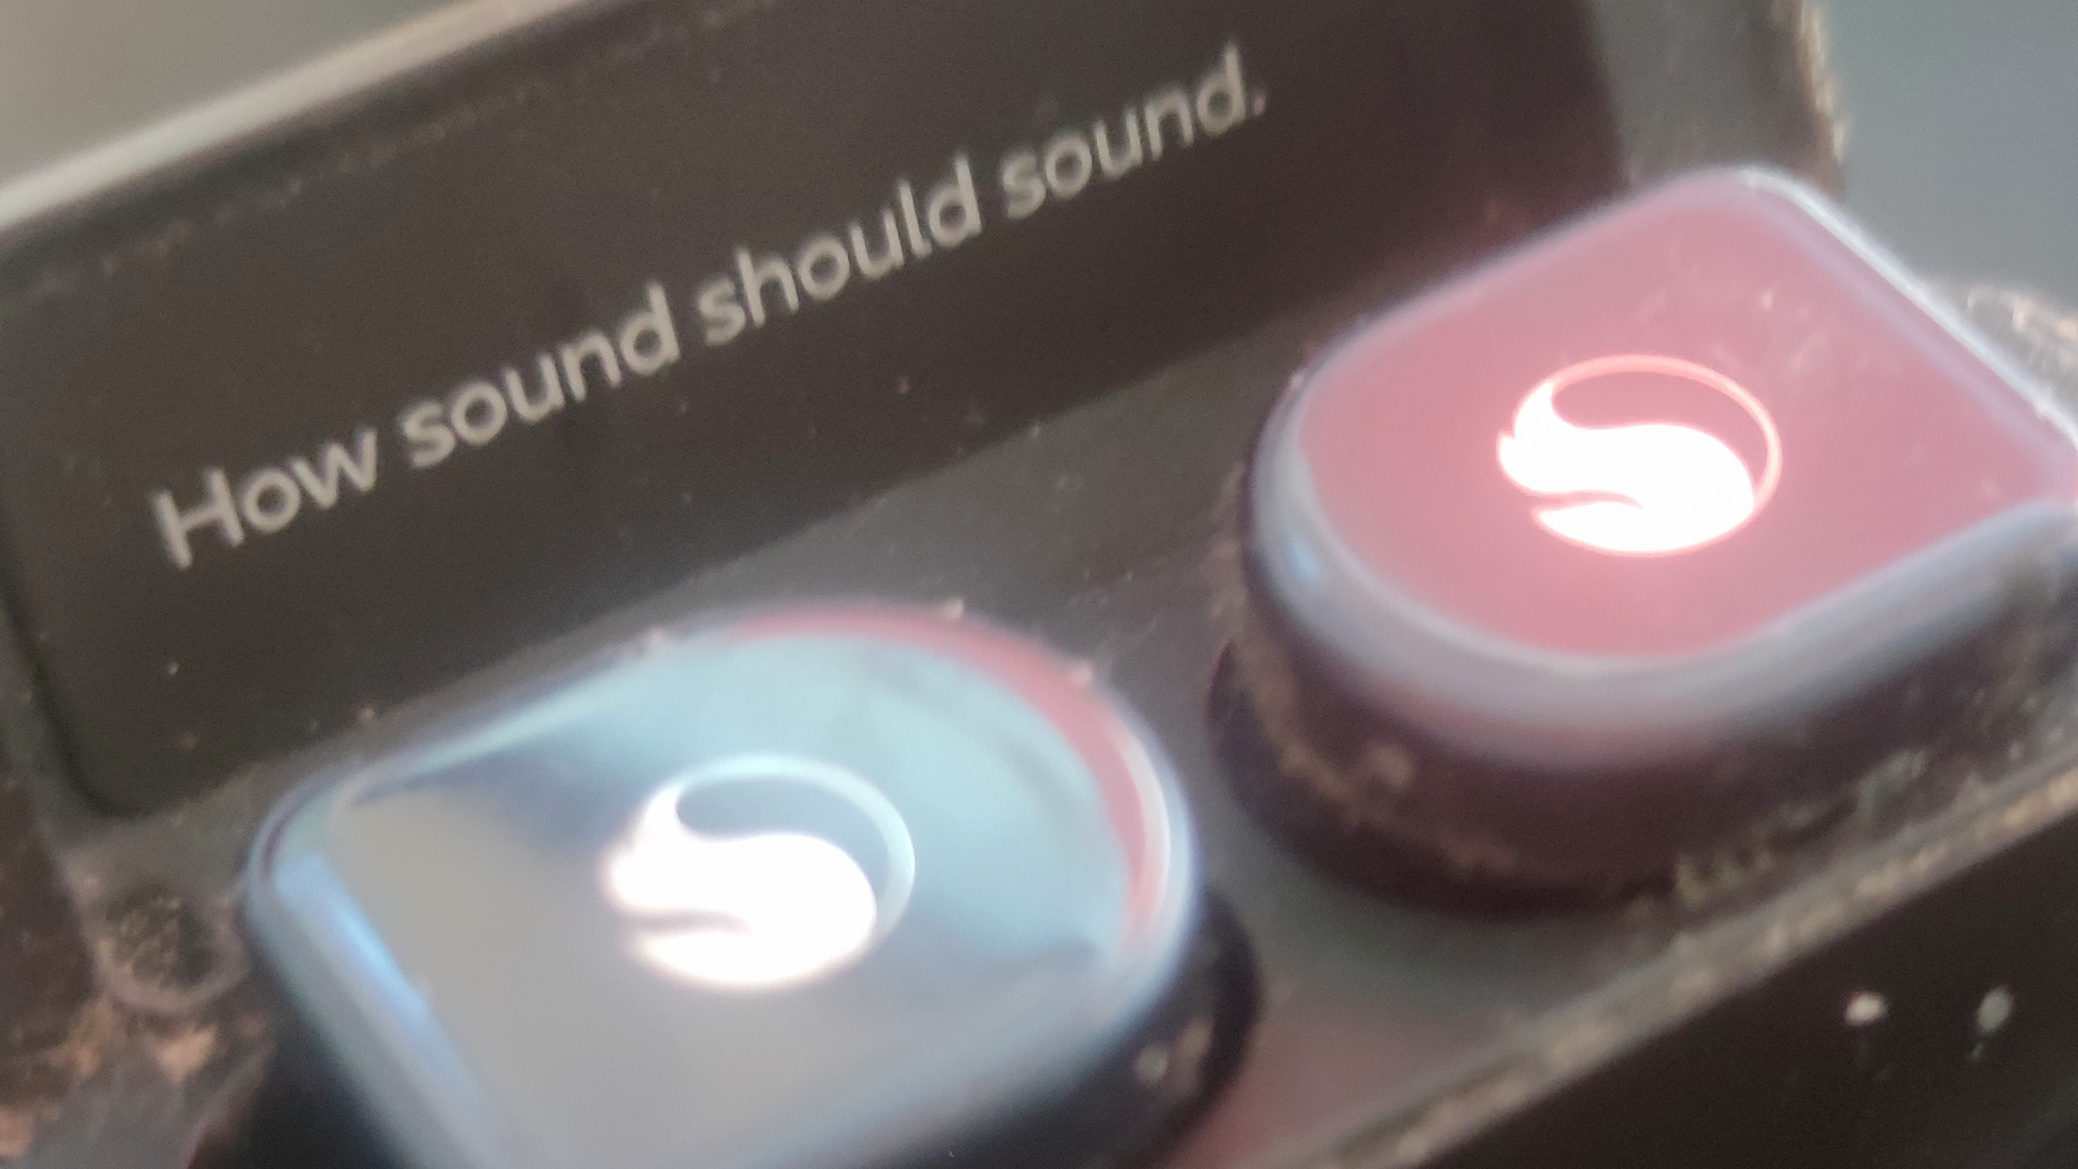 The Snapdragon Sound logo and tagline on earbuds.